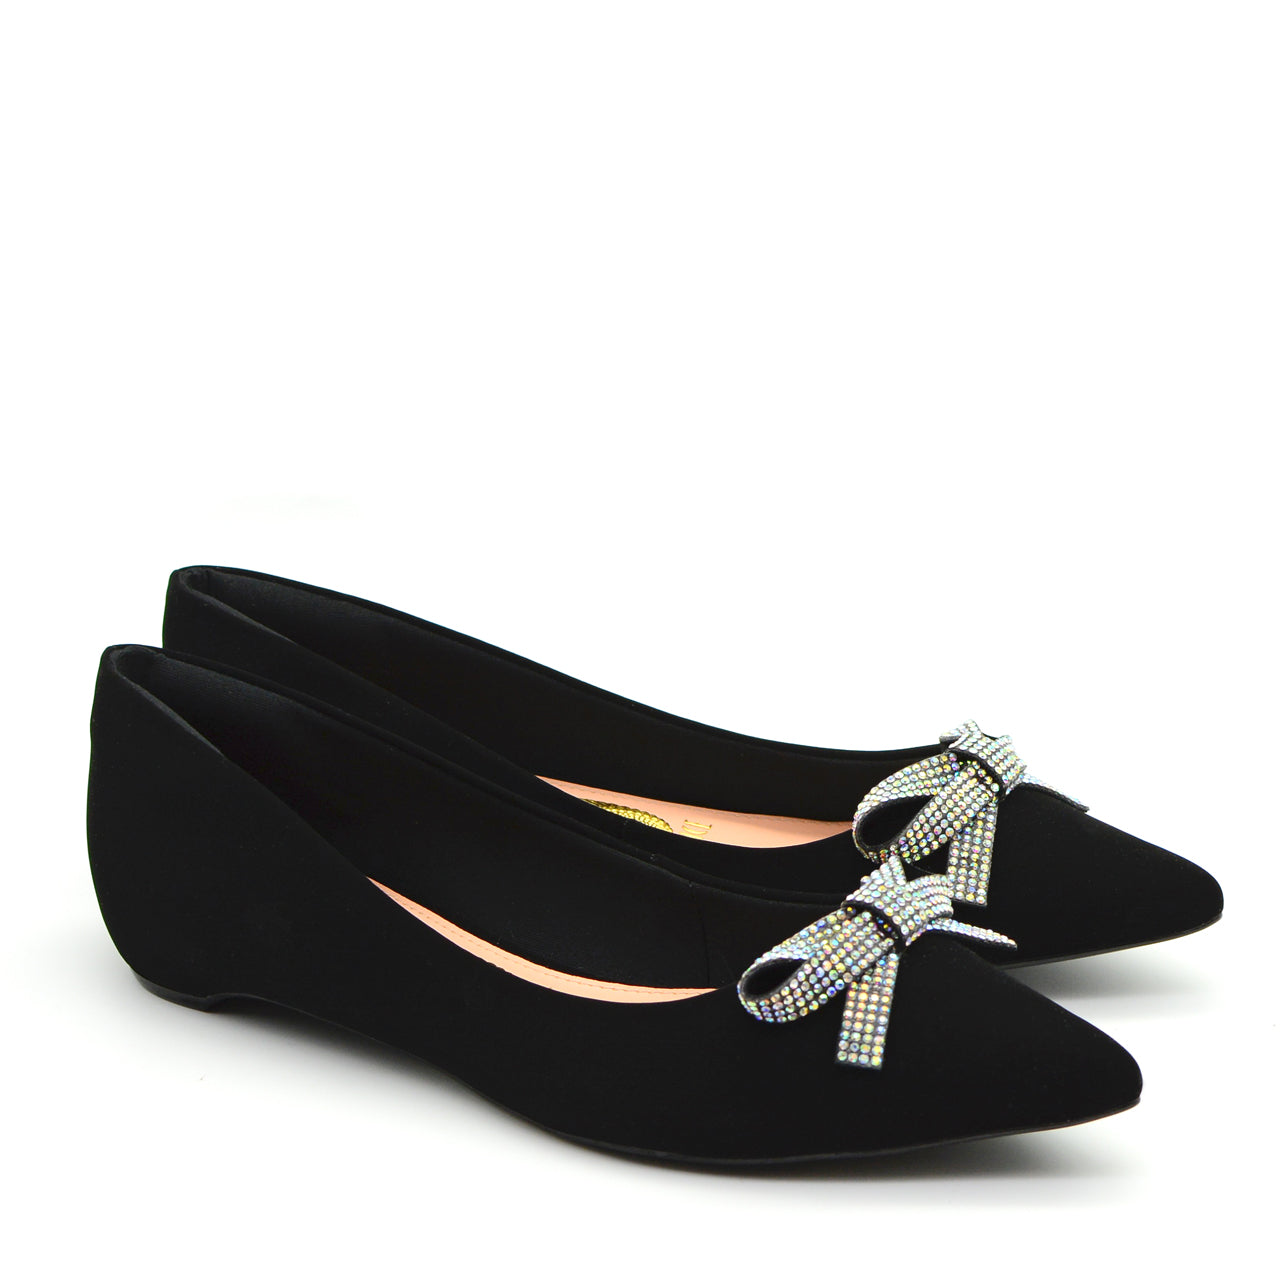 Isa Pointed Ballet Flat Shoes in Black with Silver Bow – Luiza Marchiori